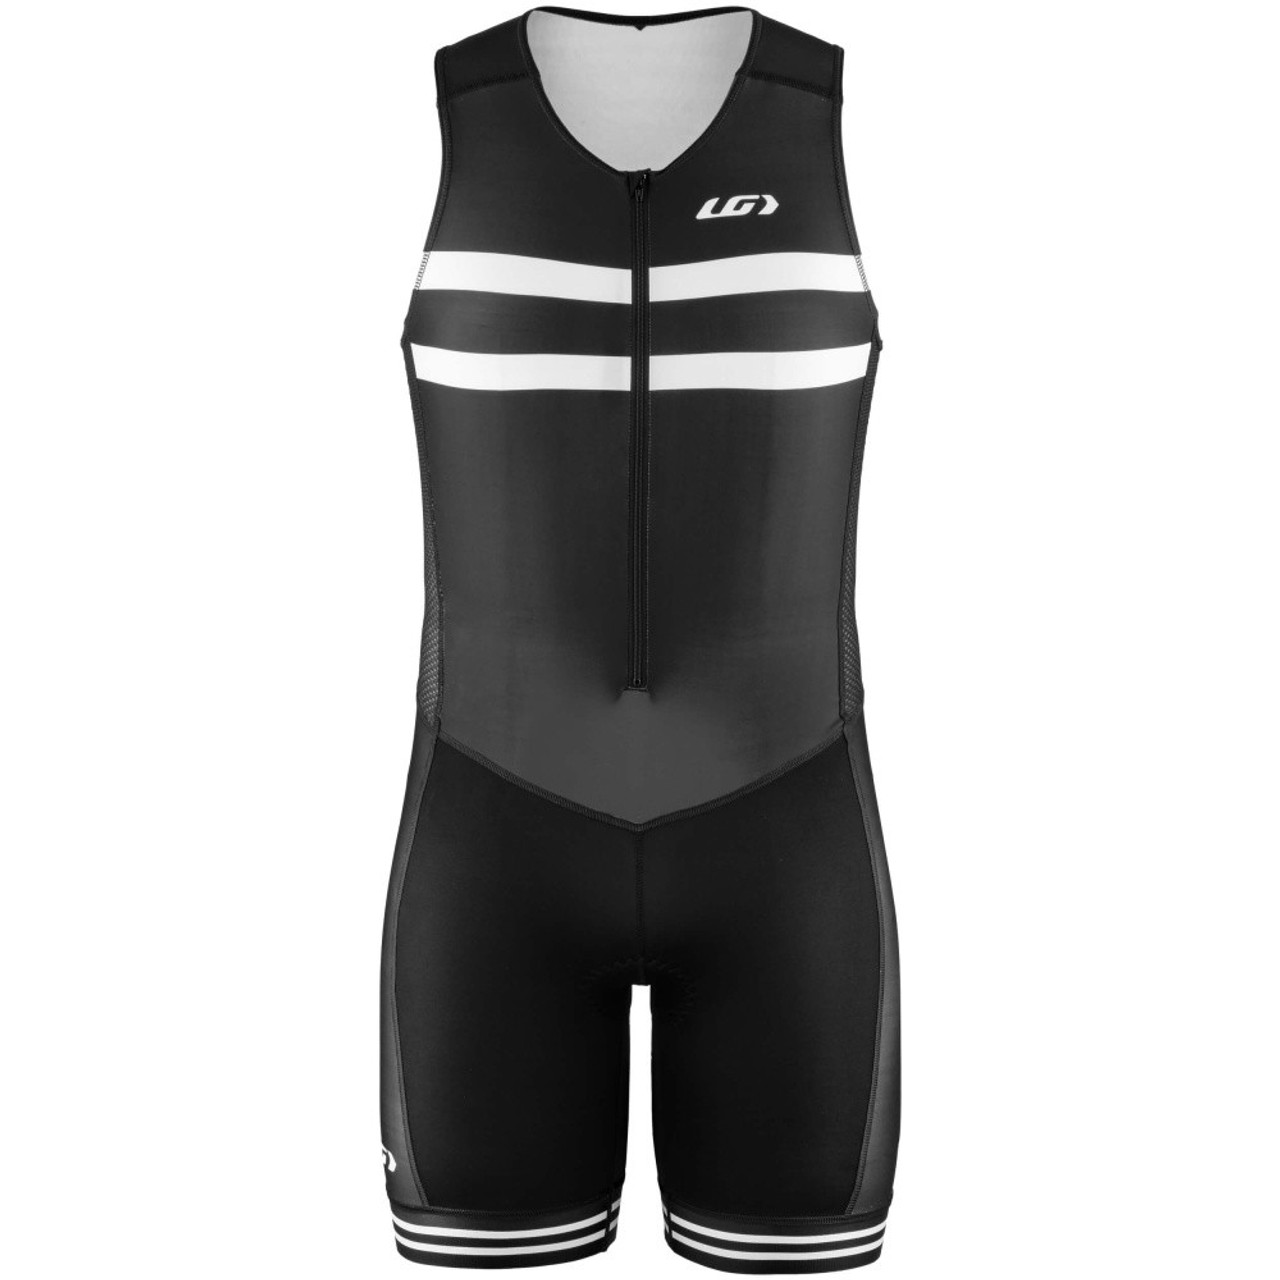 One-Piece vs Two-Piece: The Difference Between the Tri-Suits